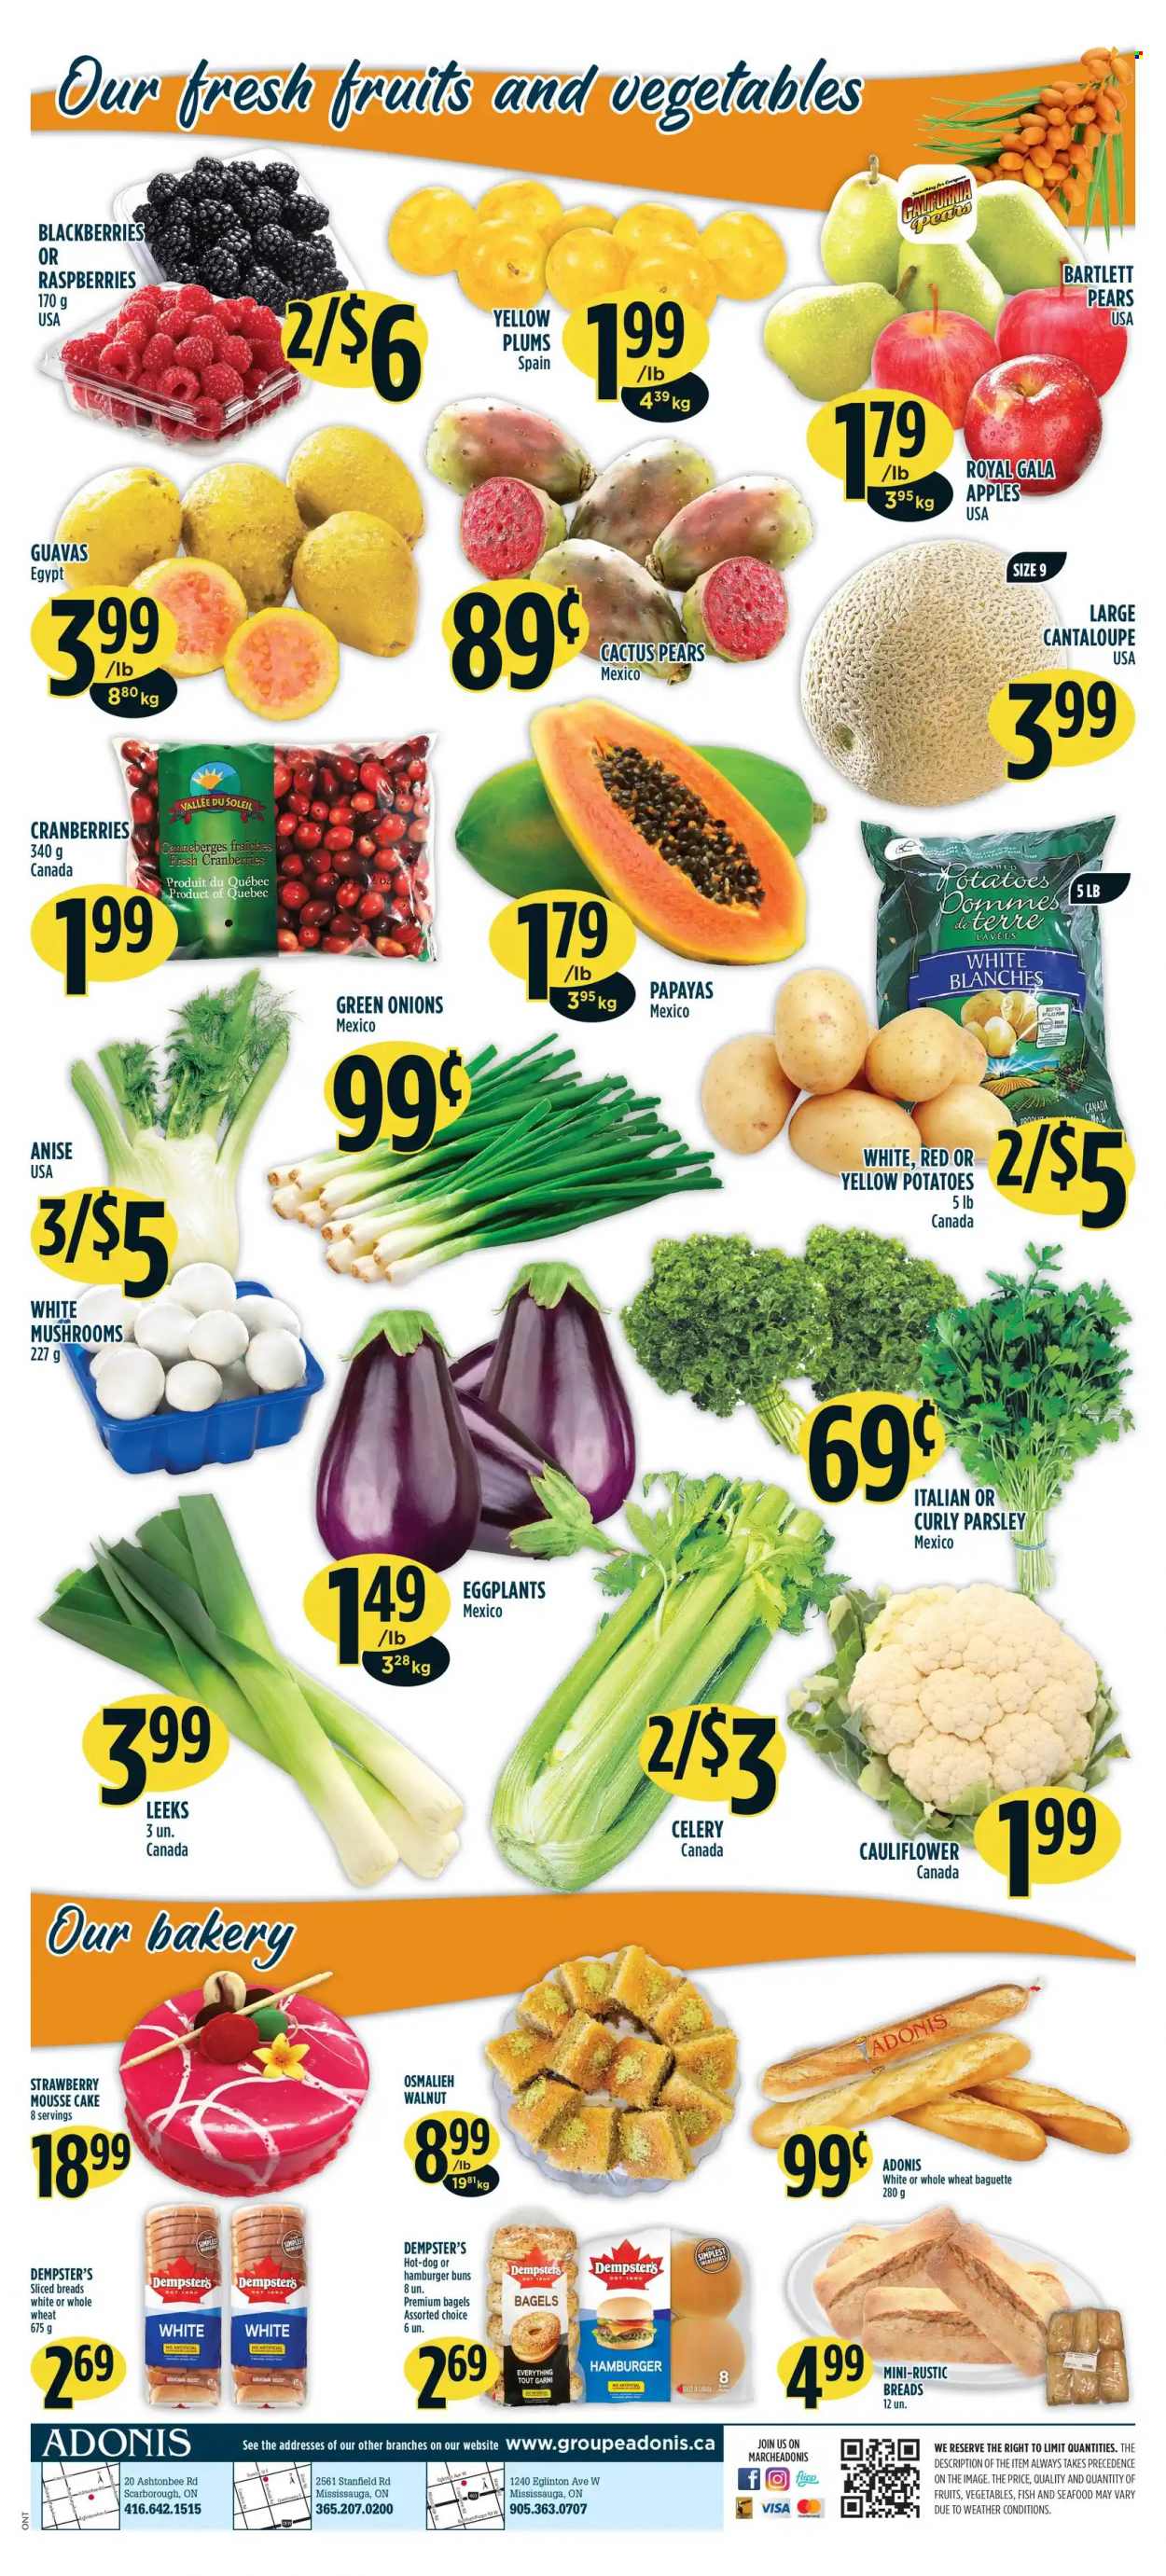 thumbnail - Adonis Flyer - September 30, 2021 - October 06, 2021 - Sales products - mushrooms, bagels, cake, buns, burger buns, cantaloupe, cauliflower, celery, potatoes, parsley, eggplant, green onion, apples, Bartlett pears, blackberries, Gala, plums, pears, seafood, cranberries, baguette. Page 4.